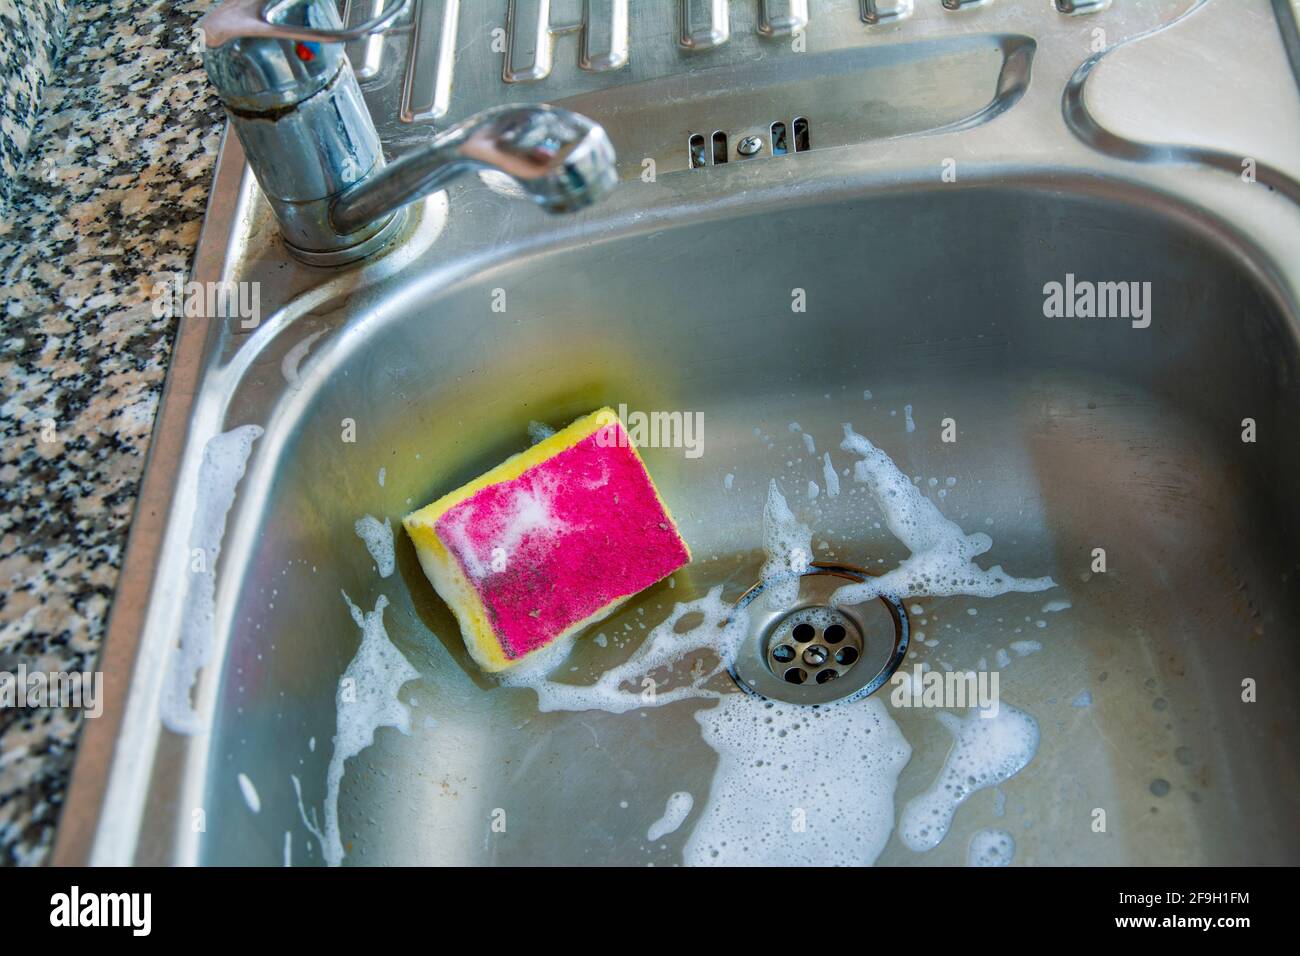 A sponge in the foamy and dirty sink Stock Photo